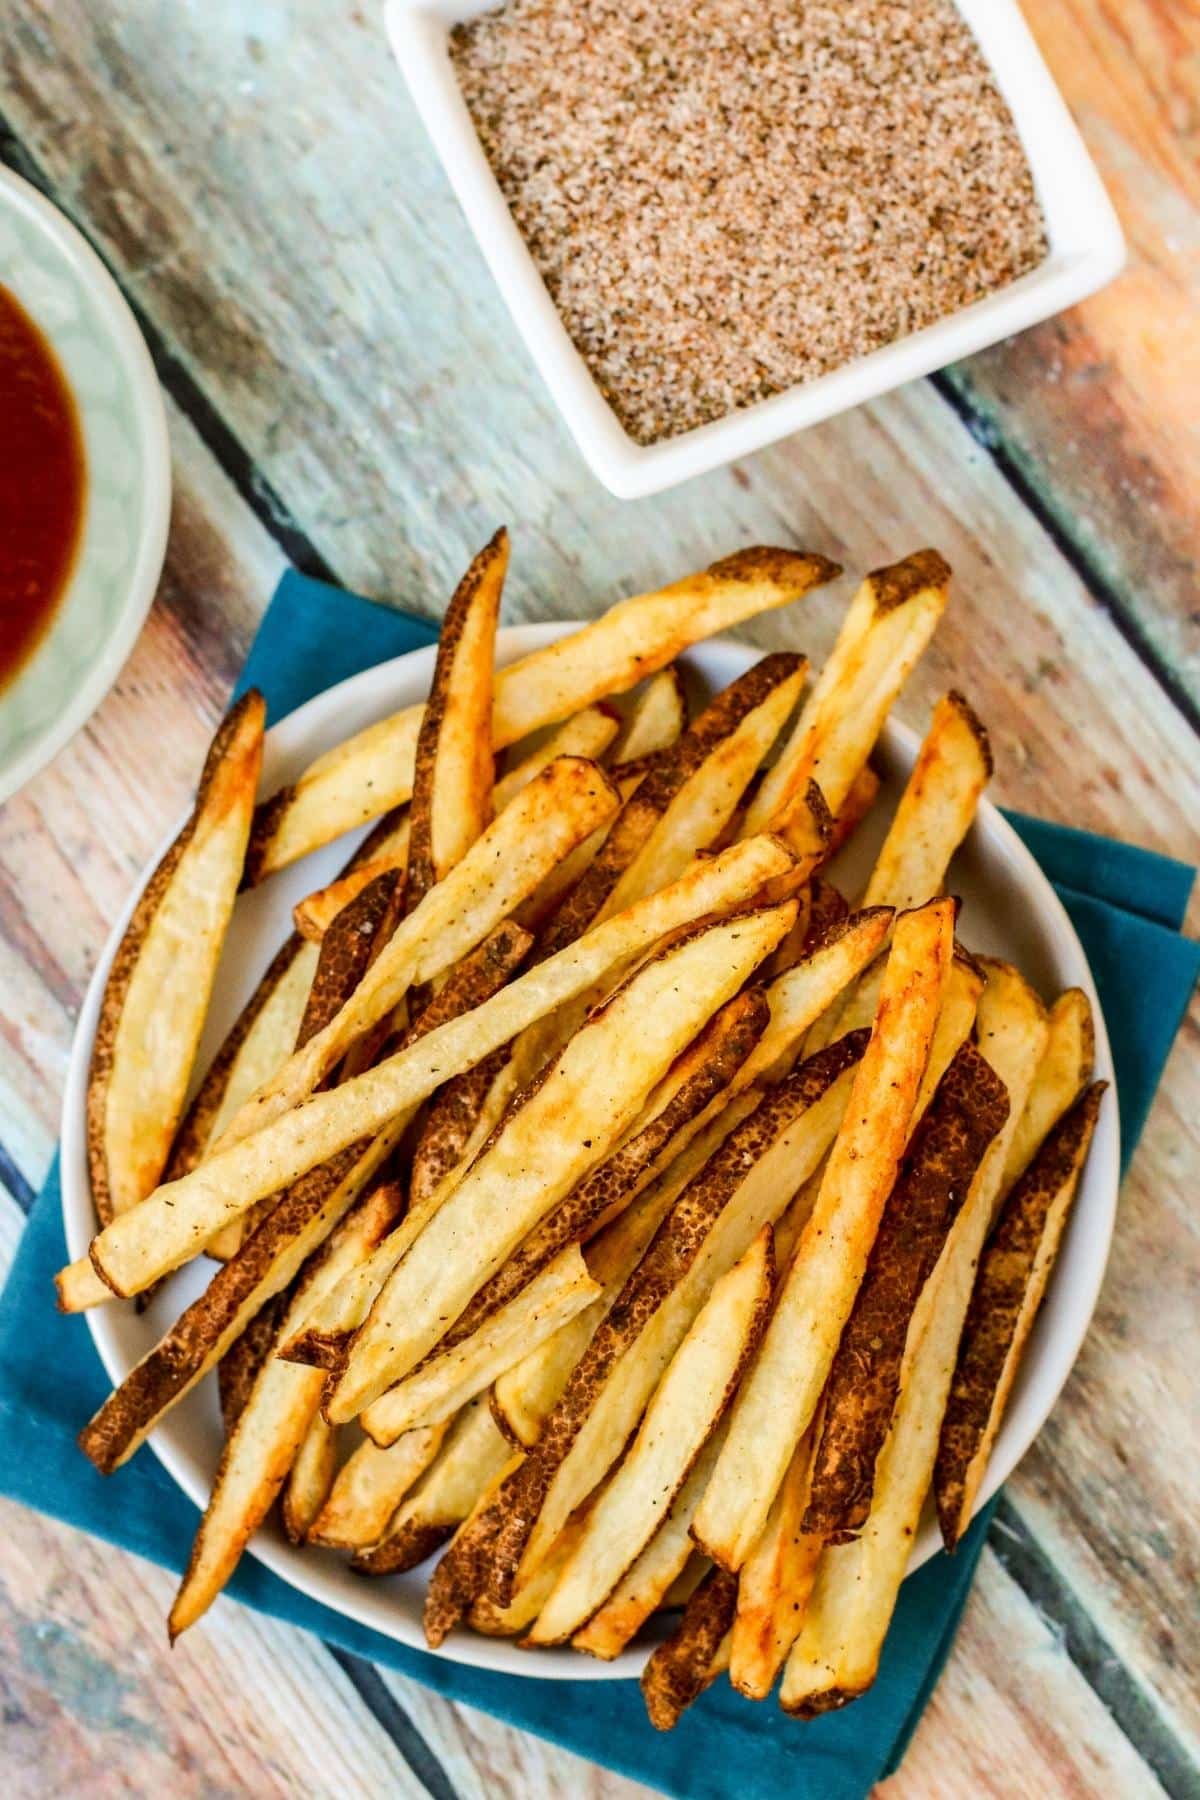 Plate of french fries with small bowls of ketchup and seasoning salt next to it.